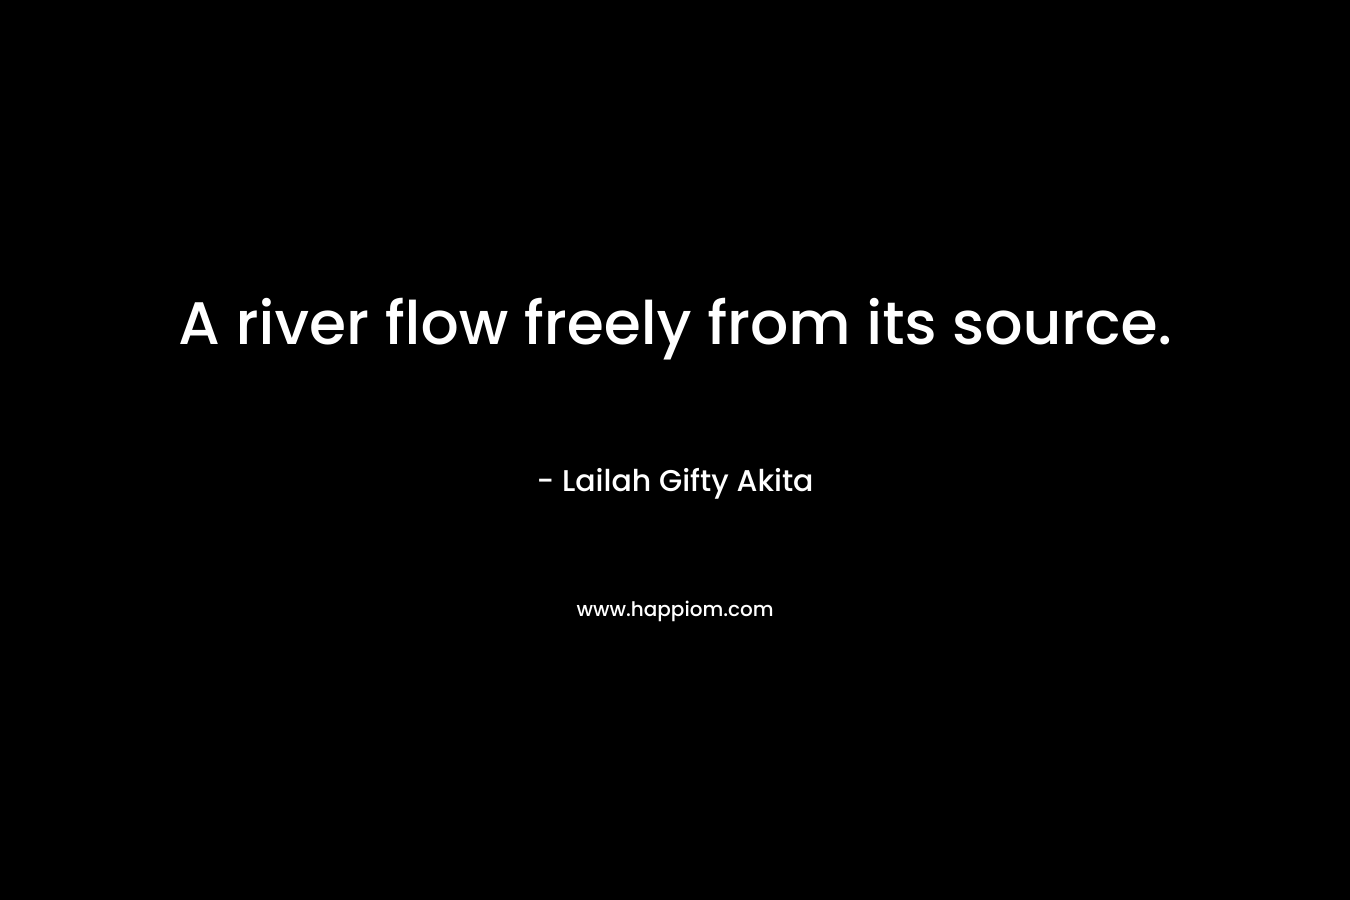 A river flow freely from its source.